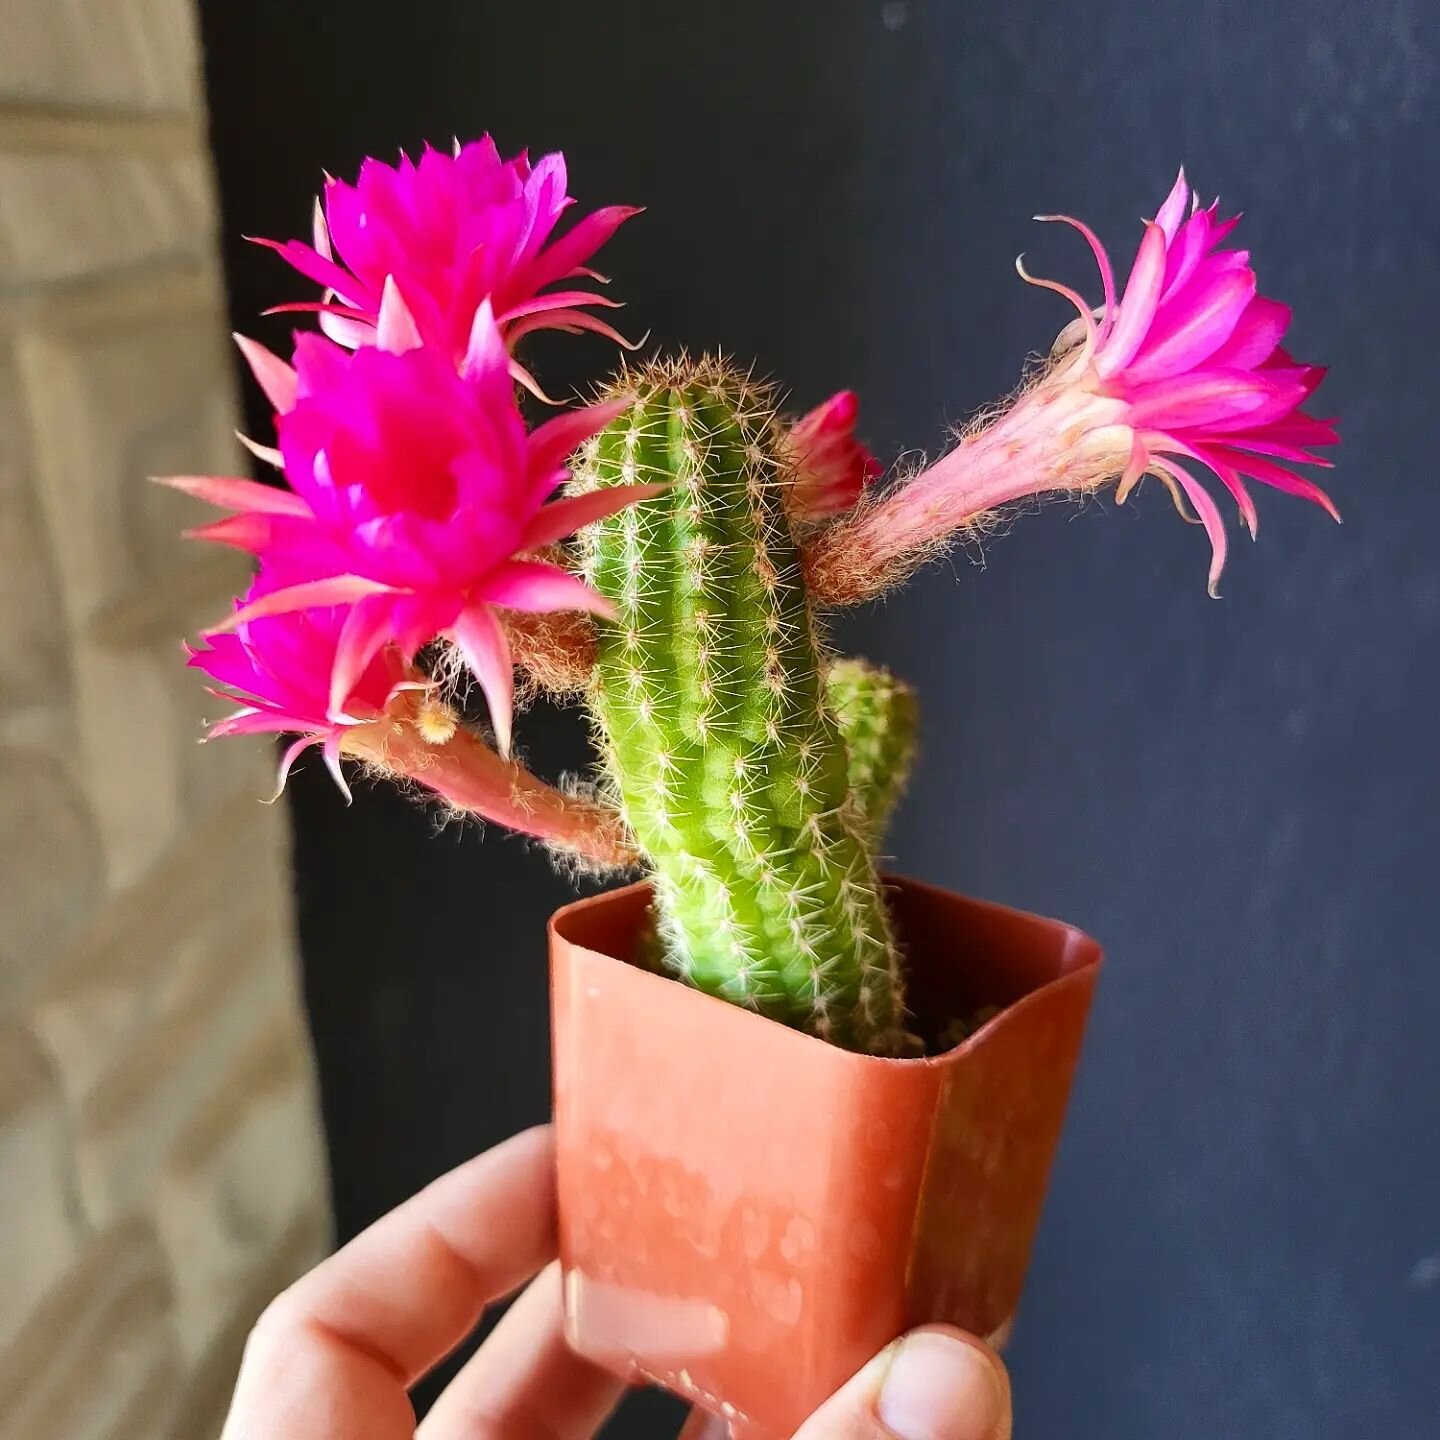 This baby cactus bloomed in our shop this week. 

It made me happy to see these bright pink flowers, so I wanted to share them with all of you 🥰

We will be at the @farmersmarketogden tomorrow from 8-1 and our shop will be open from 10-6.

Come see 